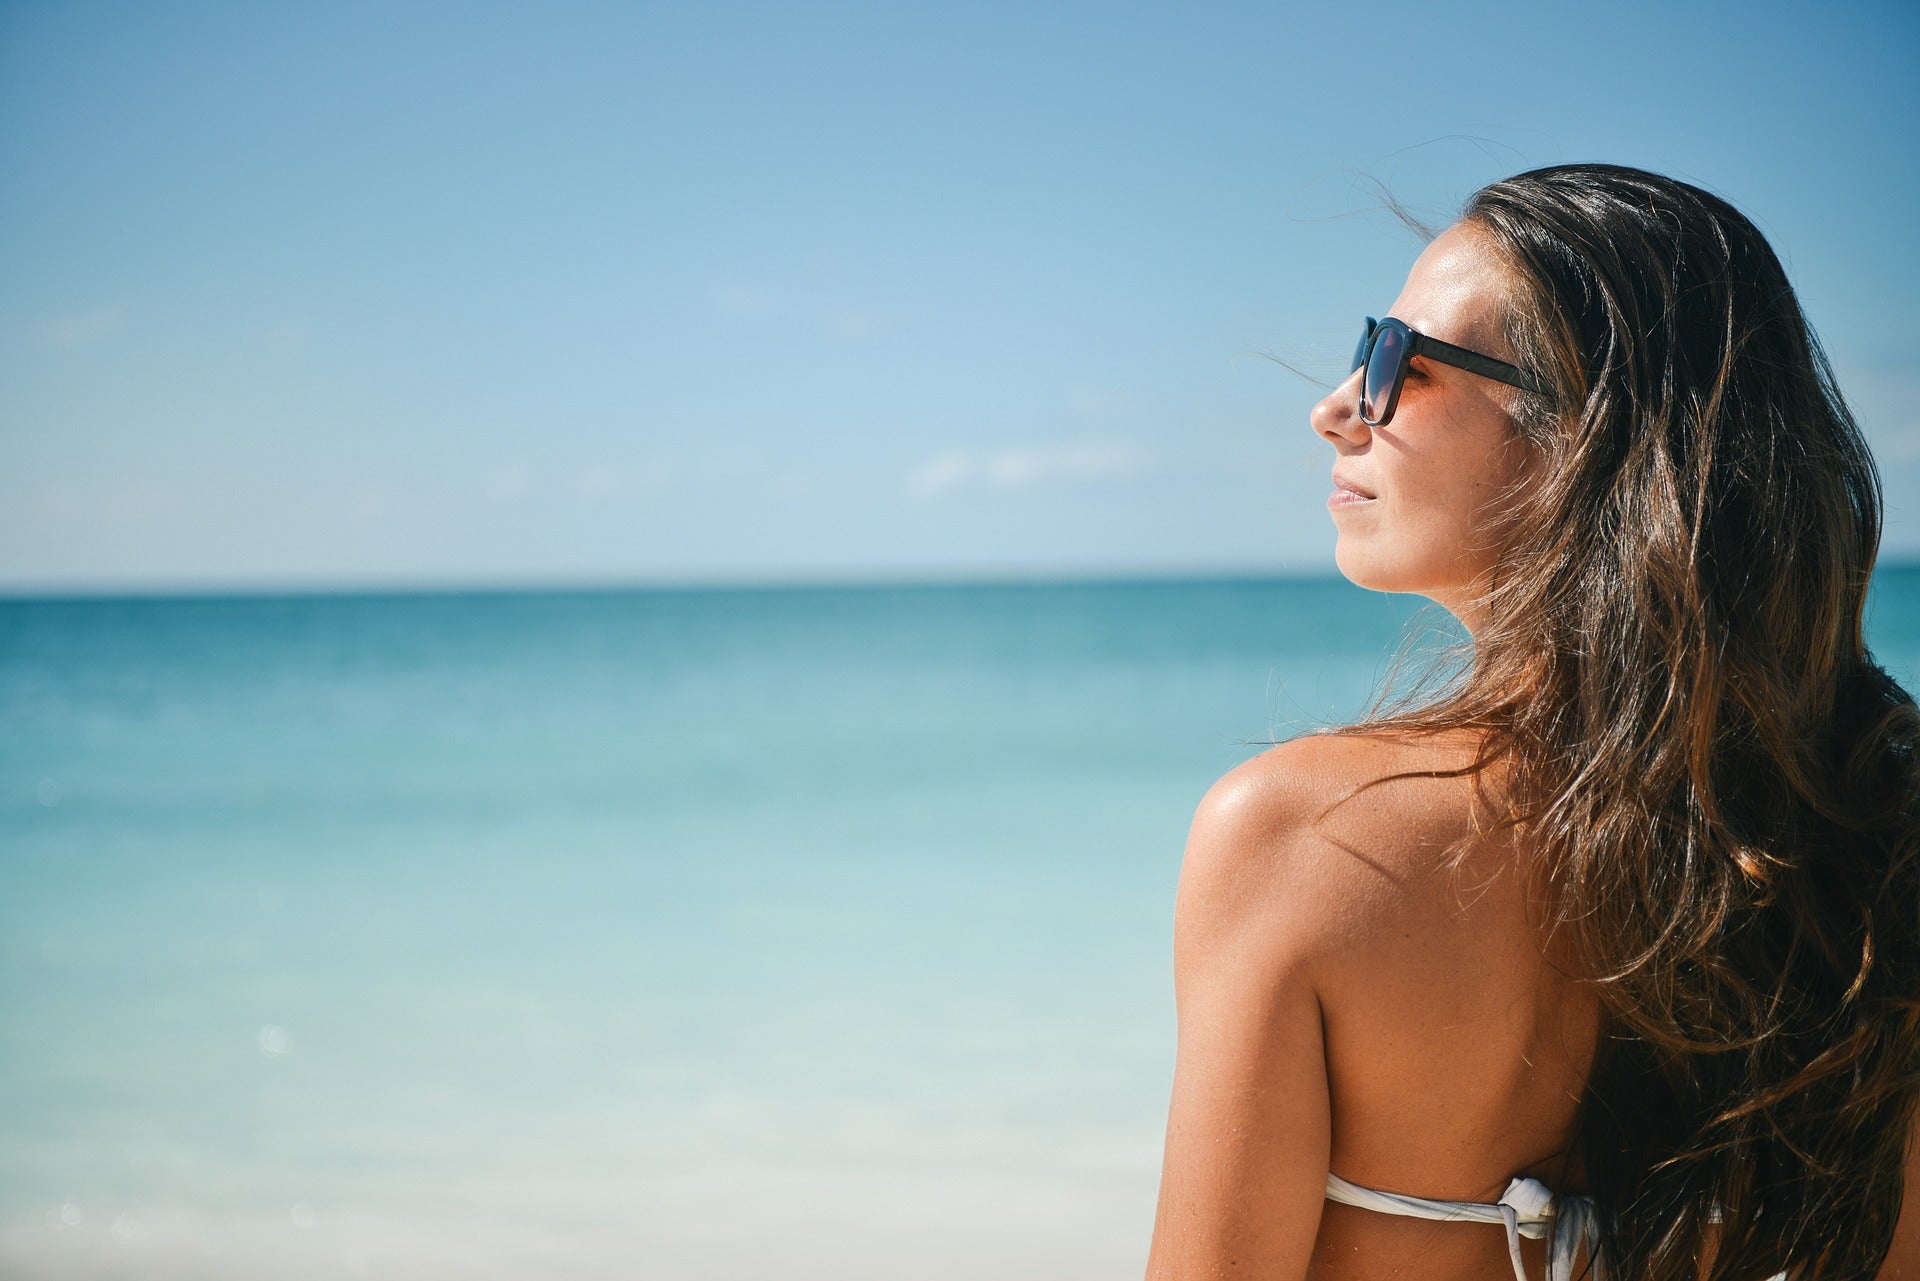 Think you know the basics about sun safety? Take this quiz